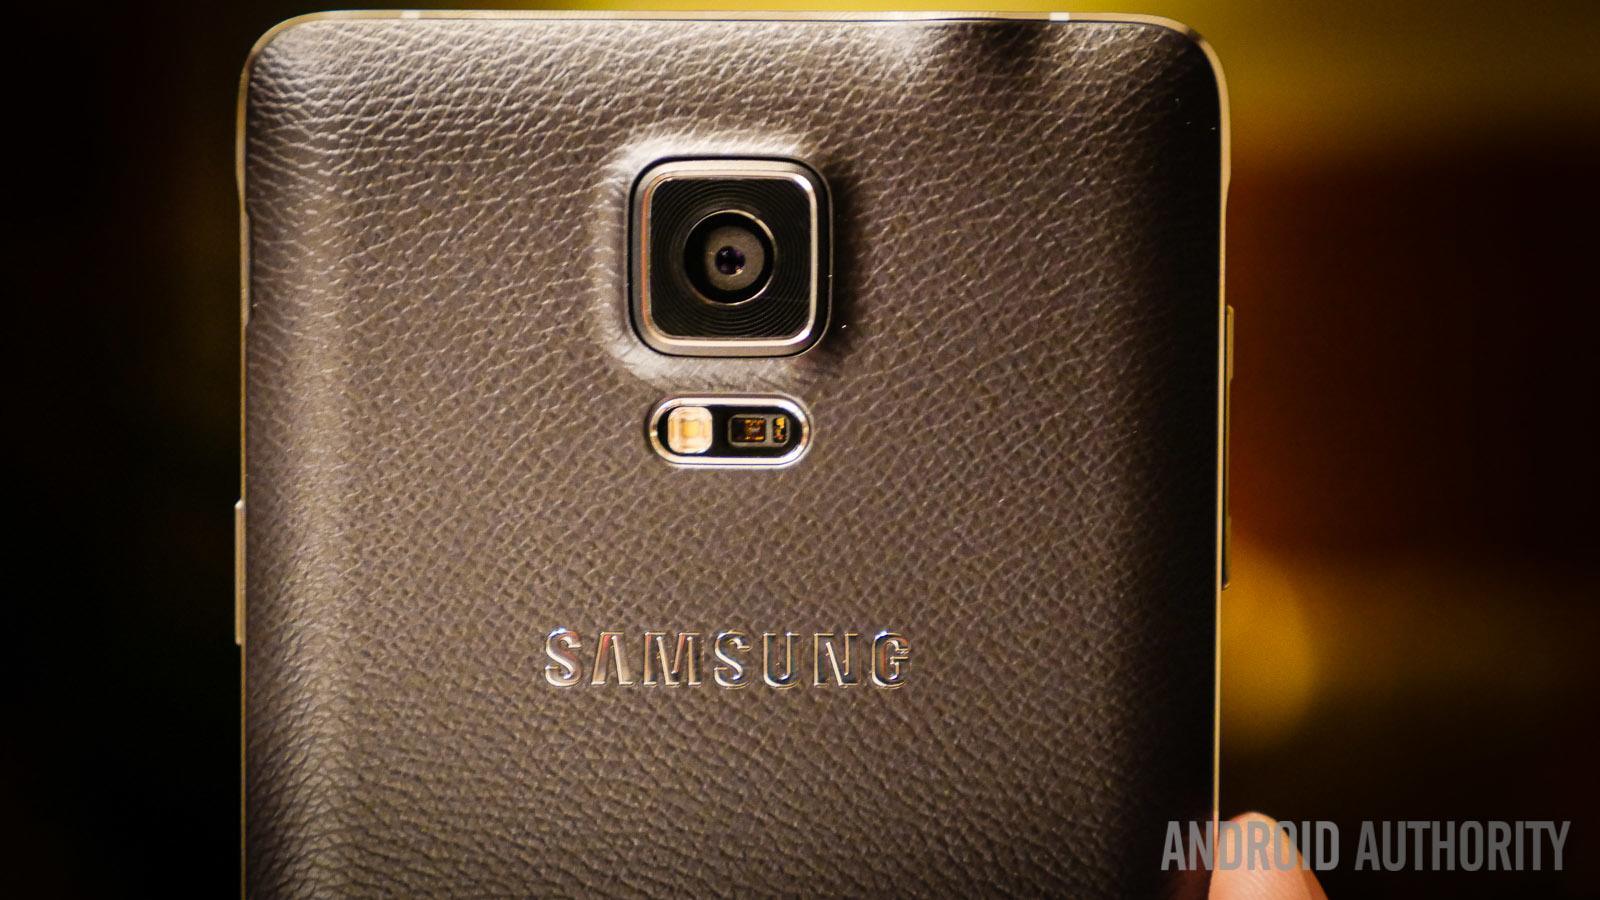 samsung galaxy note 4 first impressions (16 of 20)